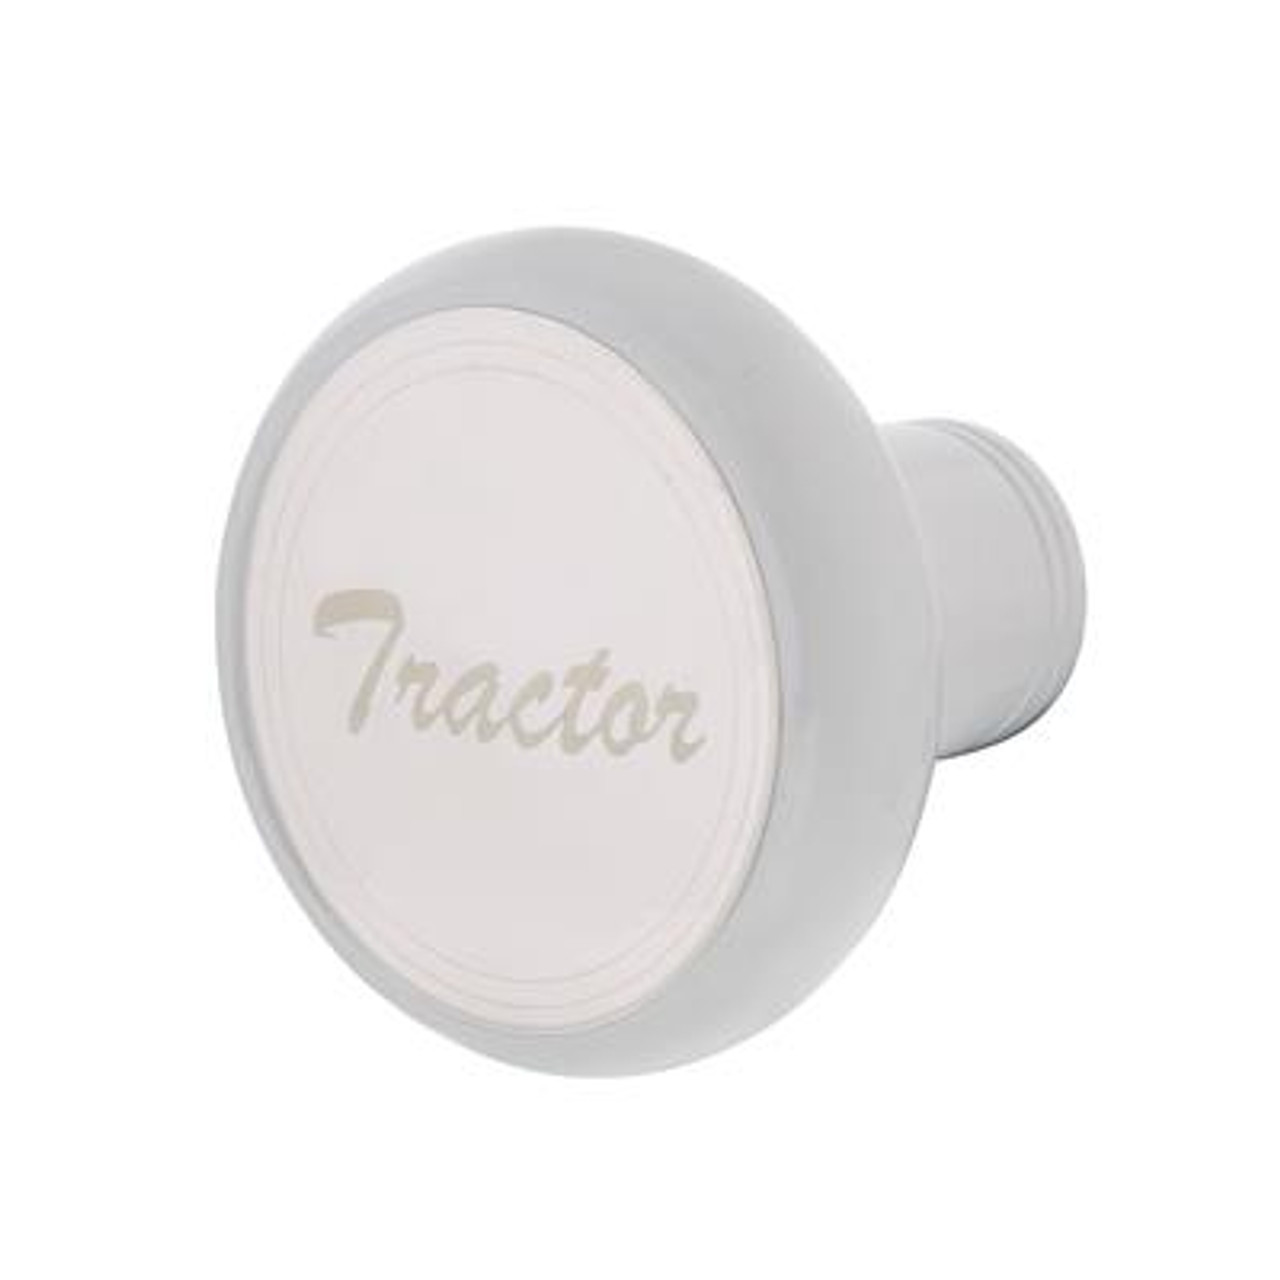 "Tractor" Deluxe Aluminum Screw-On Air Valve Knob With Stainless Plaque - Pearl White